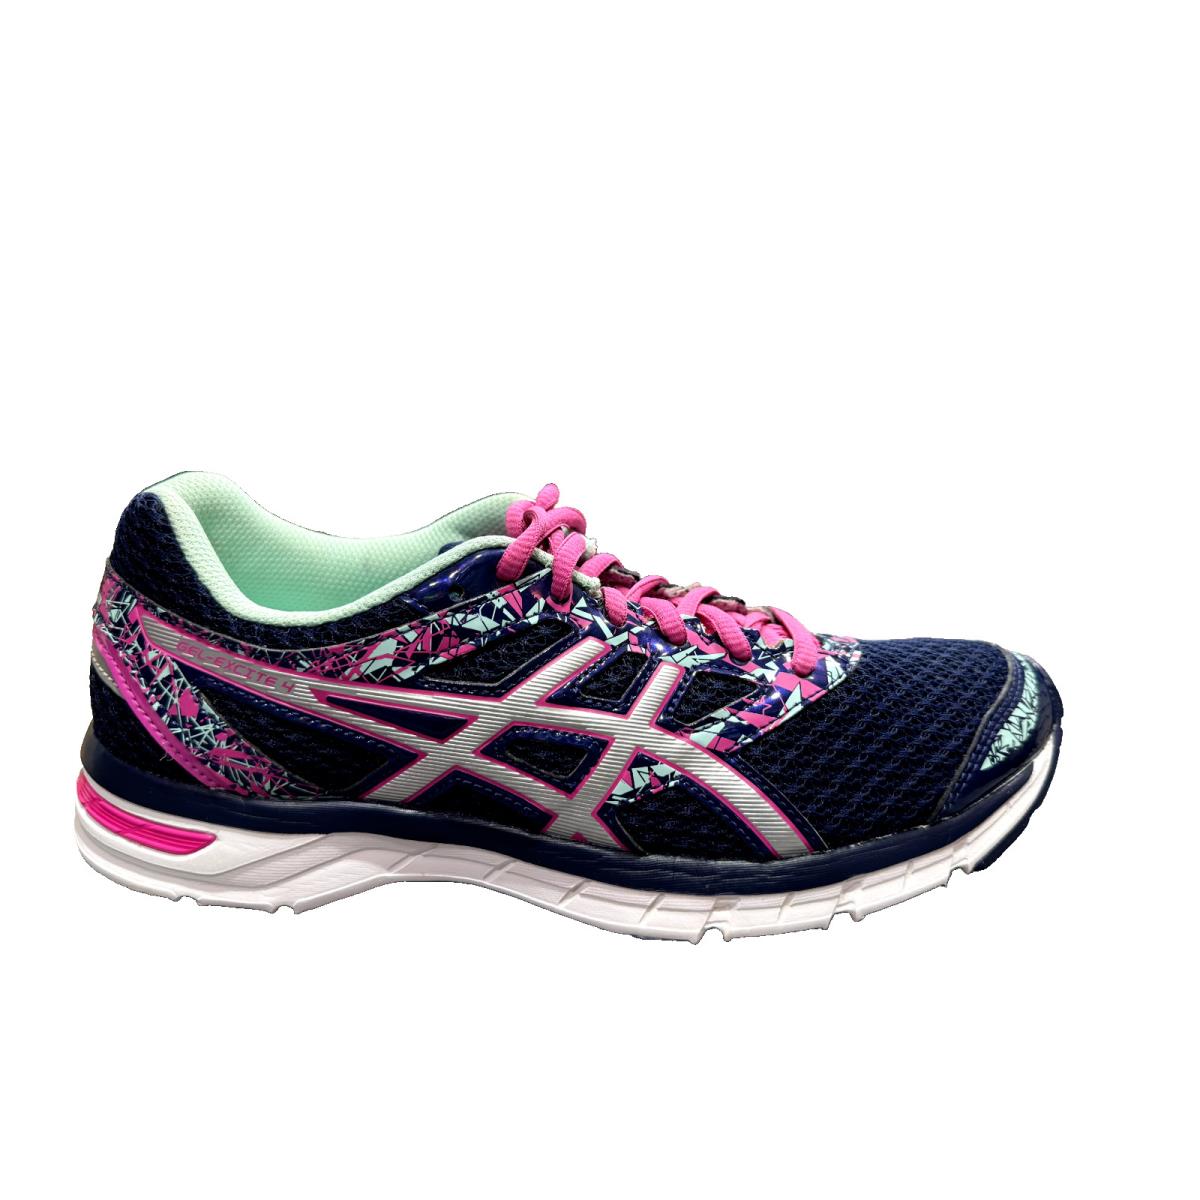 Asics Womens Gel-excite 4 Casual Sneakers Athletic Shoes Blueprint/silver